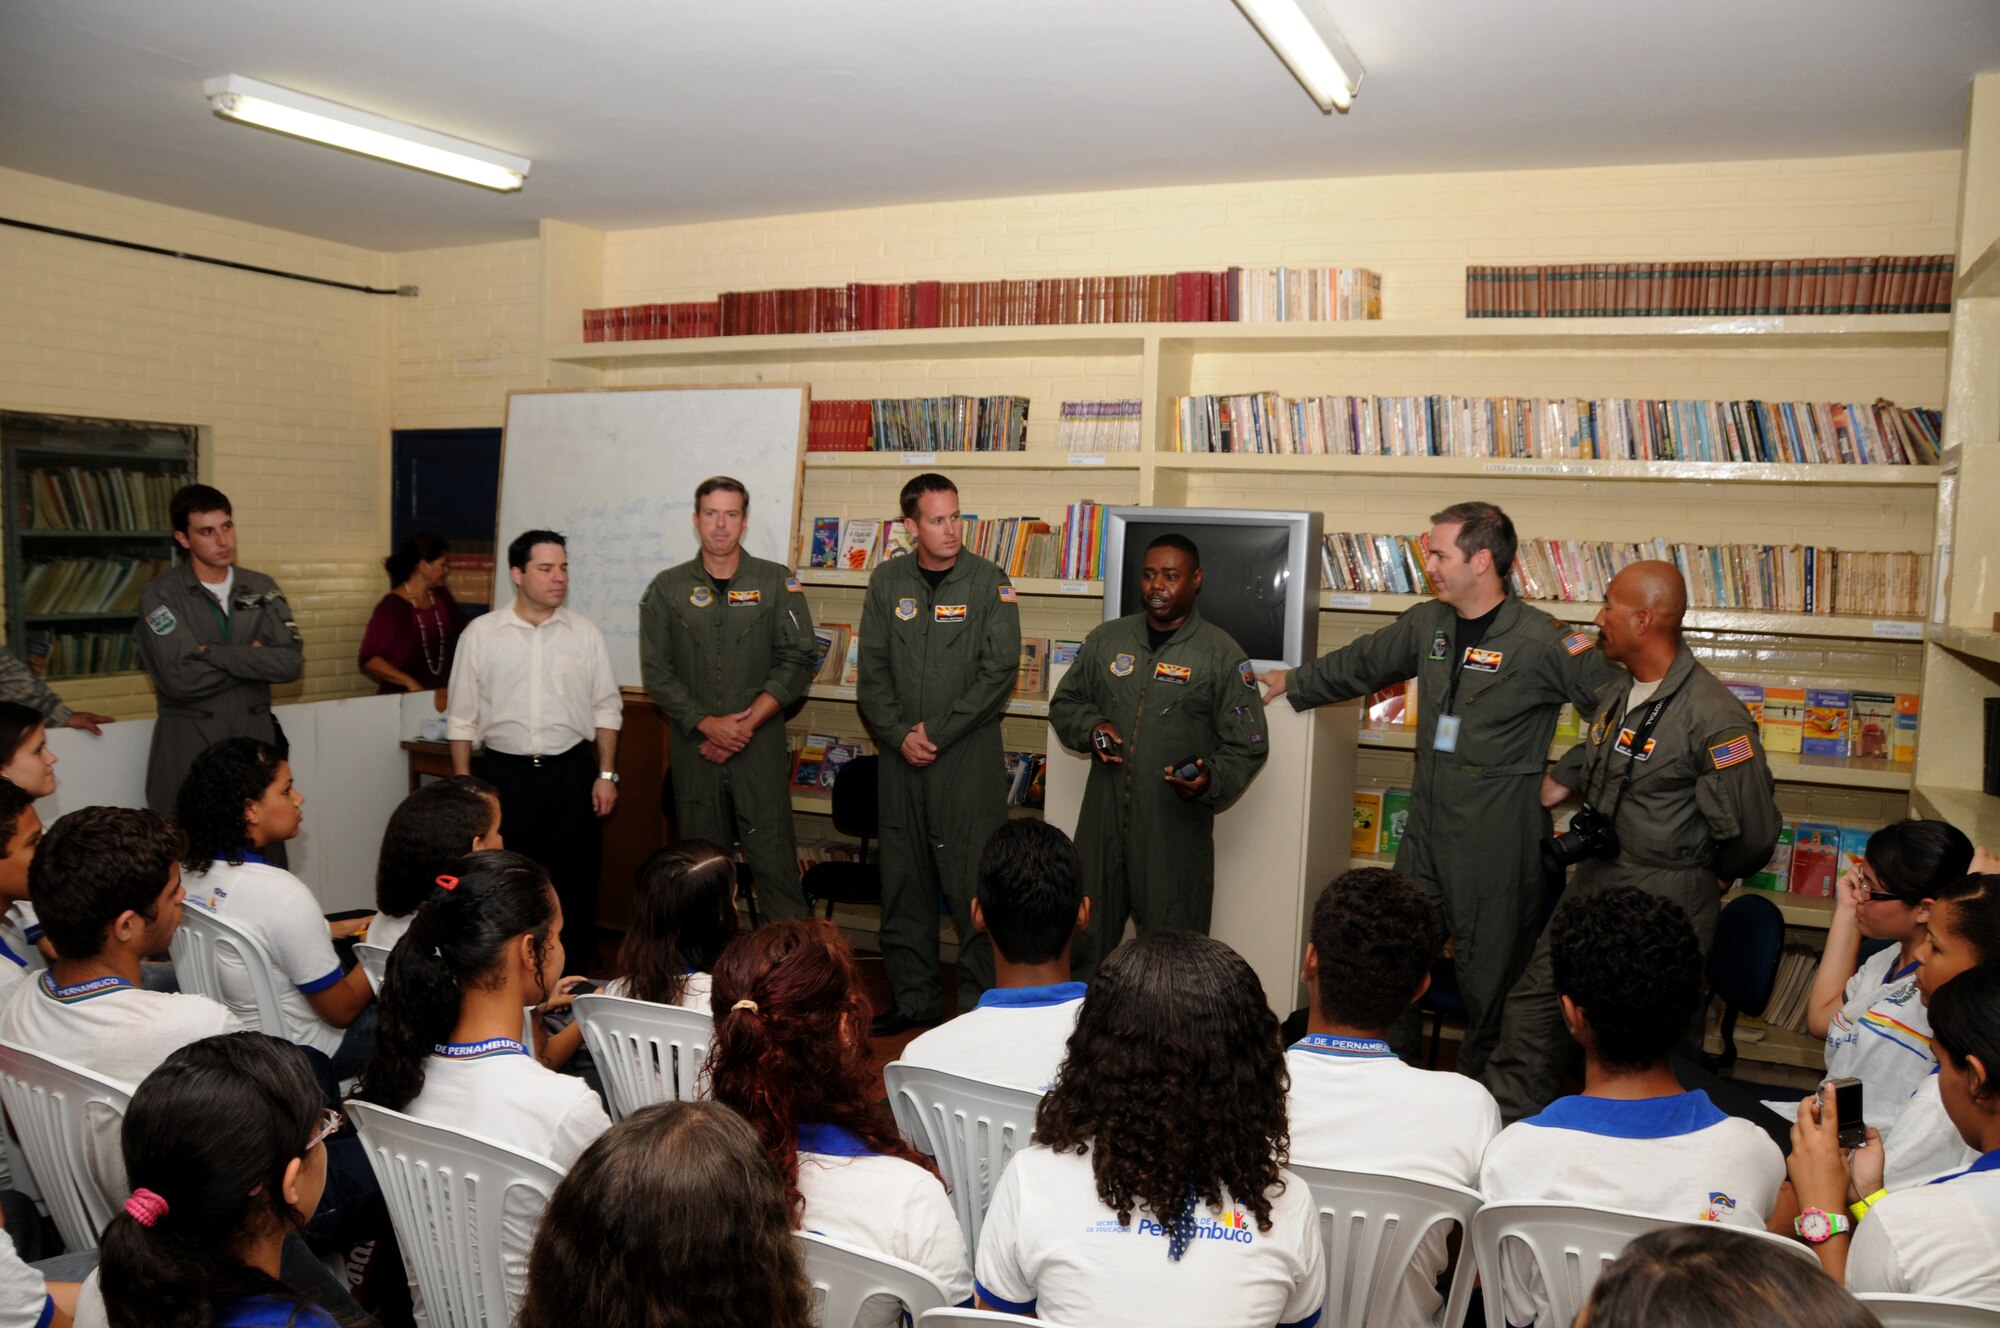 Members from the 161st Air Refueling Wing, Phoenix, Ariz., talk with students from Escola Santos Dumont School on November 11, 2010, in Recife, Brazil . The 161st ARW is participating in CRUZEX V, or Cruzeiro Do Sul (Southern Cross).  CRUZEX  is a multi-national combined exercise involving the Air Forces of Argentina, Brazil, Chile, France and Uruguay, and observers from numerous other countries with more than 82 aircraft and almost 3,000 Airmen involved.  U.S. Air Force Photo by Master Sgt. Kelly M. Deitloff